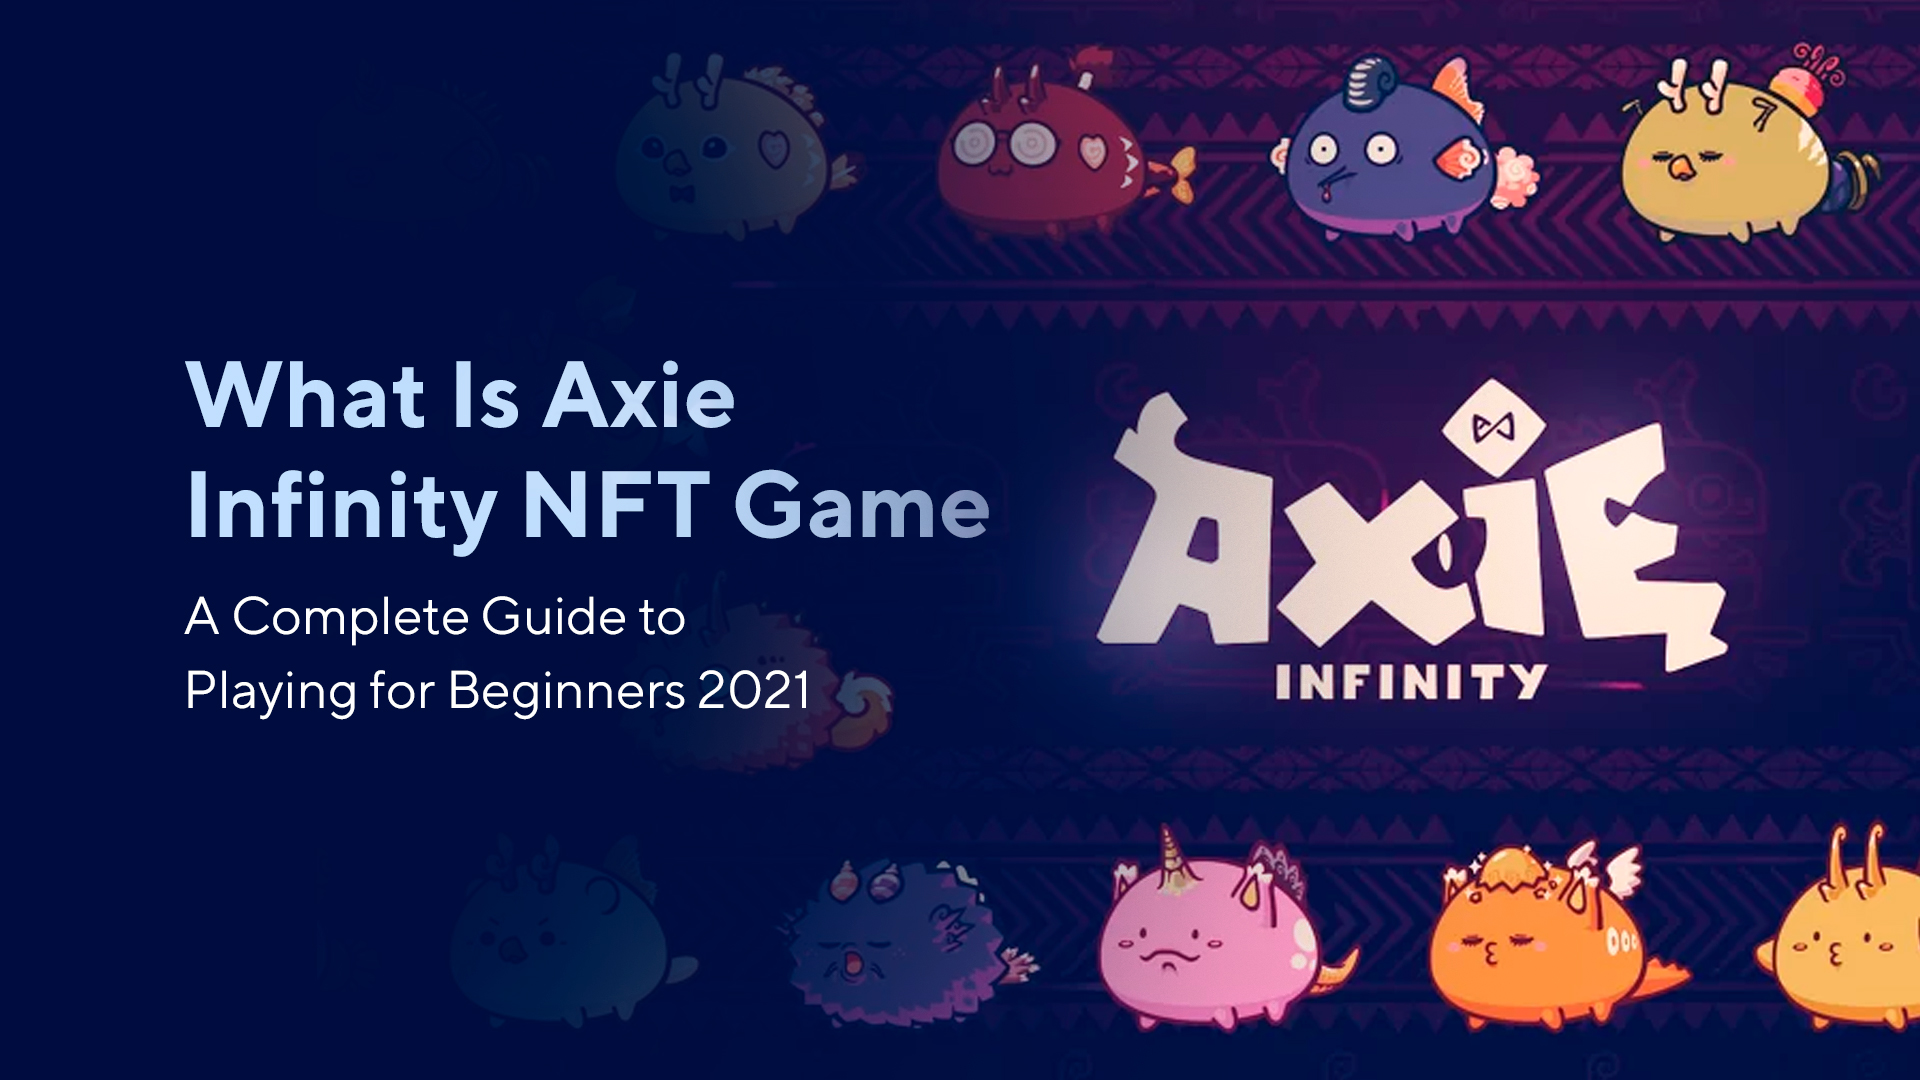 What Is Axie Infinity NFT Game: A Complete Guide to Playing for Beginners 2021